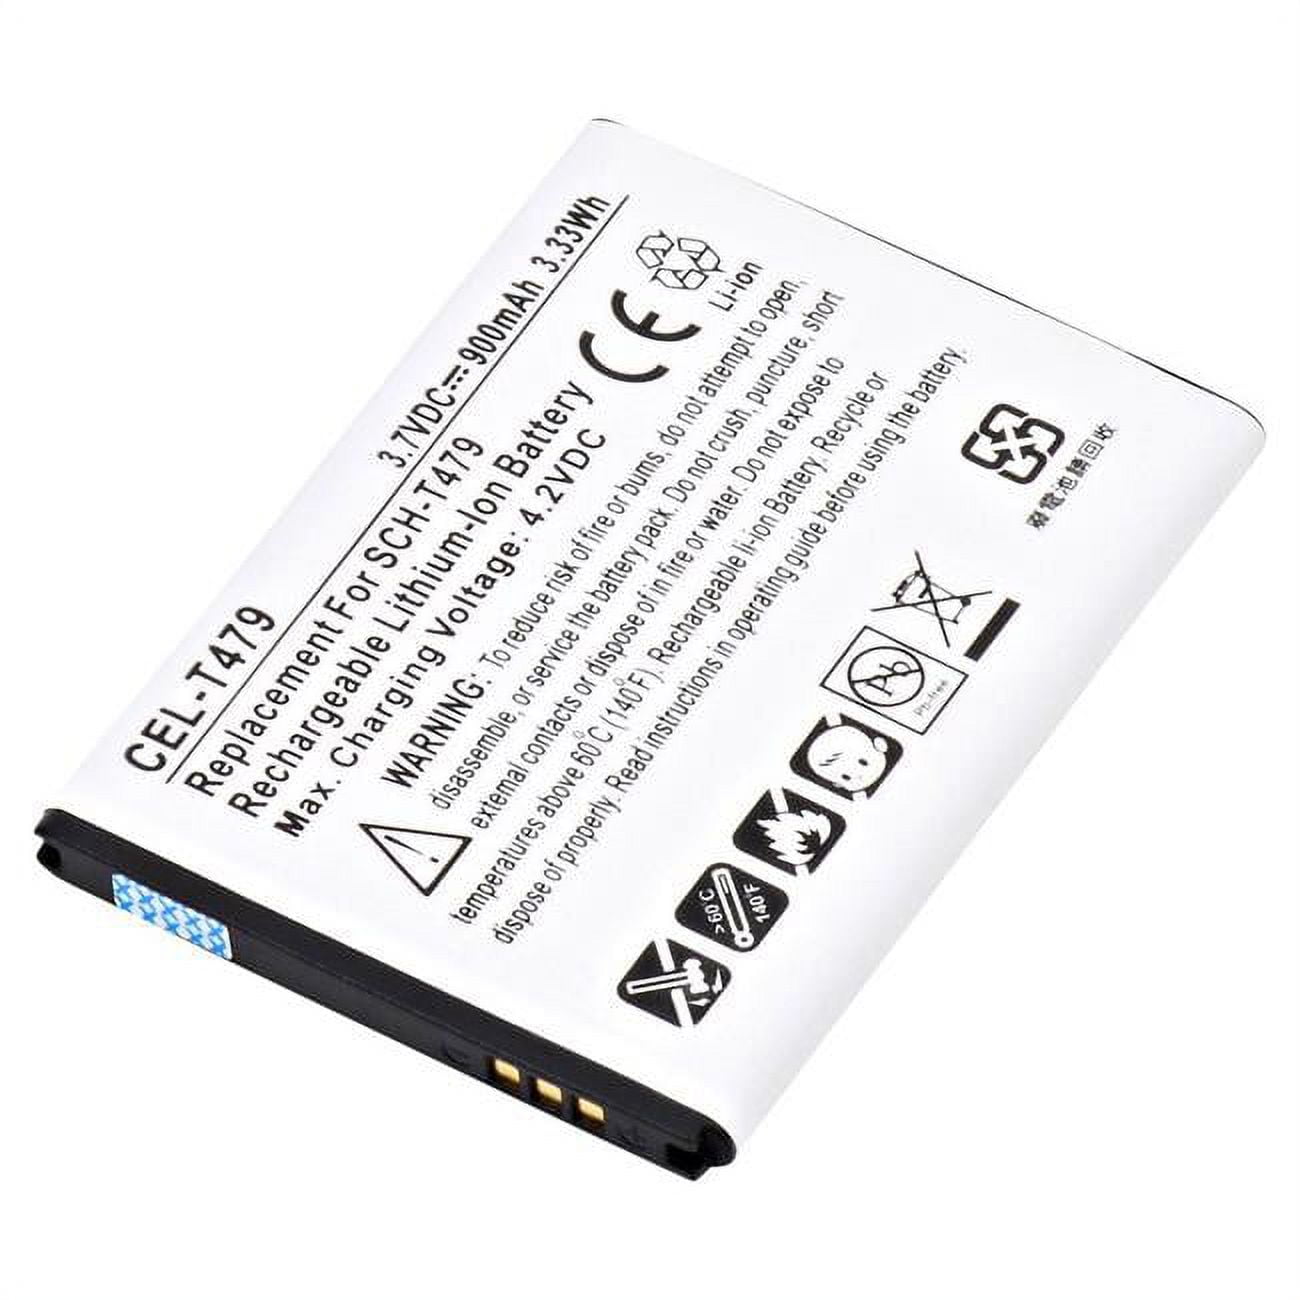 Picture of Ultralast CEL-T479 3.7V & 900 mAh Replacement Lithium-Ion Battery for Samsung Character Cellular Phone